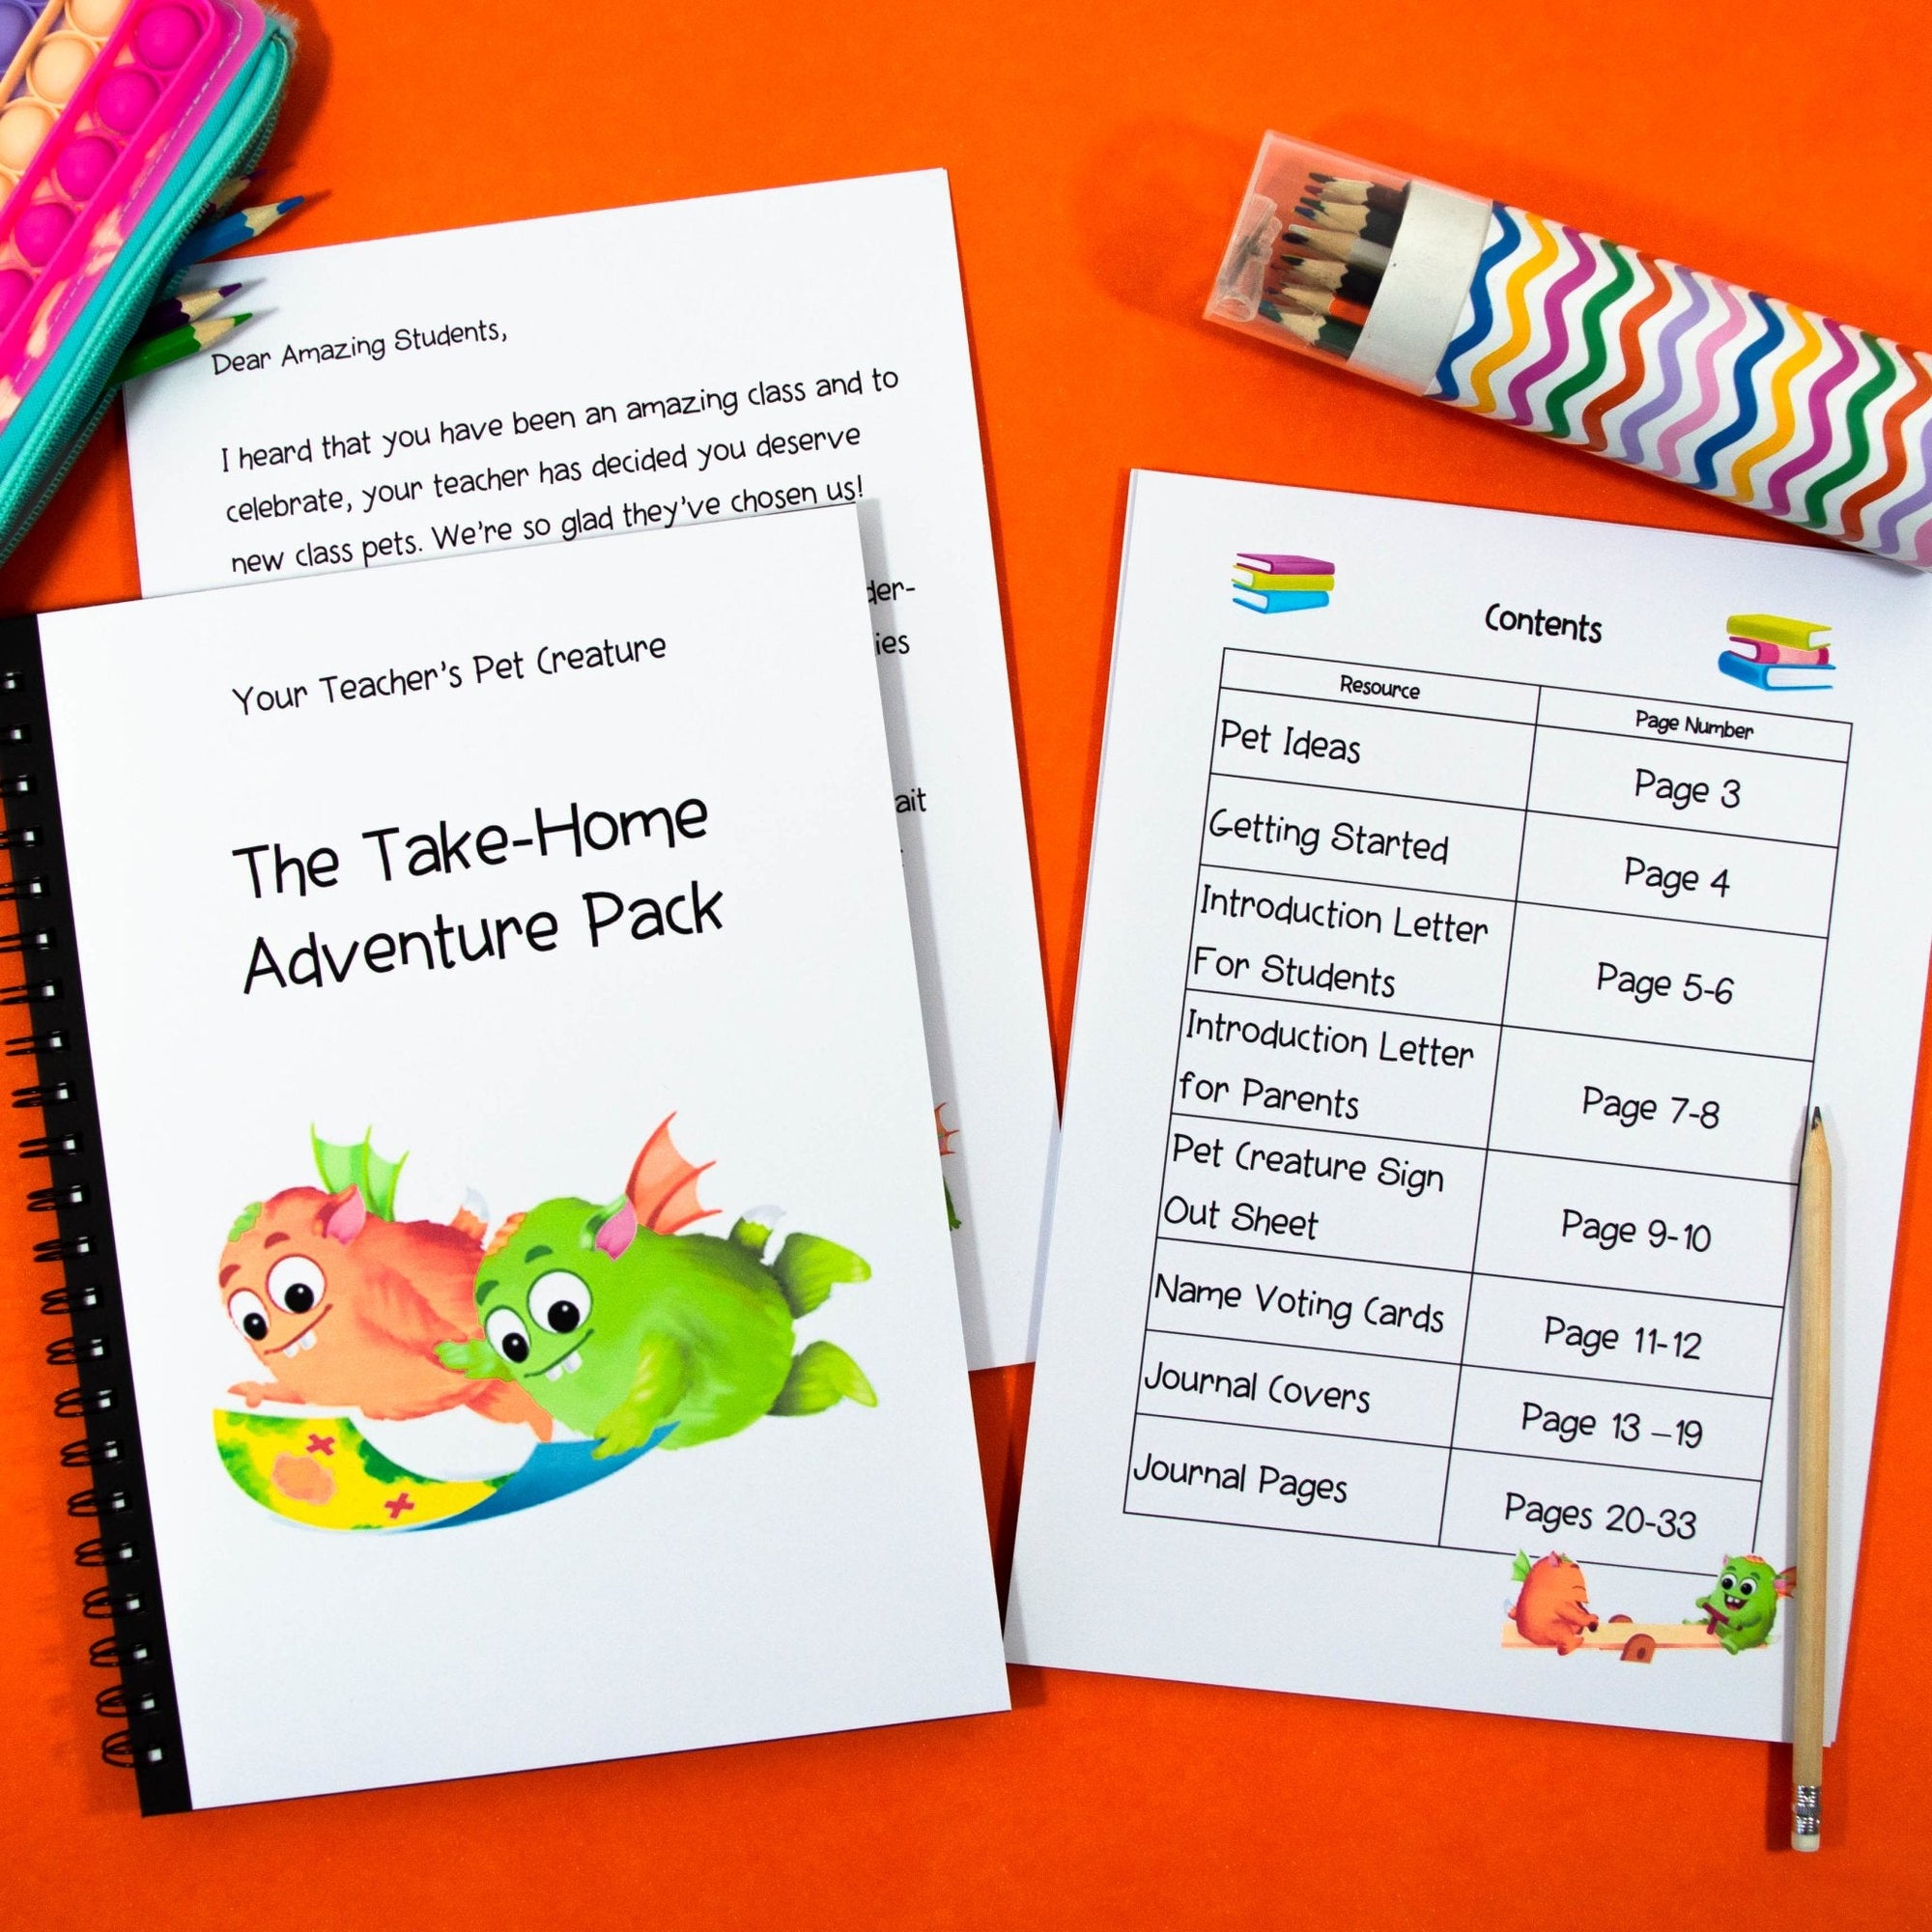 Take Home Adventure Pack - Green and Orange - Your Teacher's Pet Creature